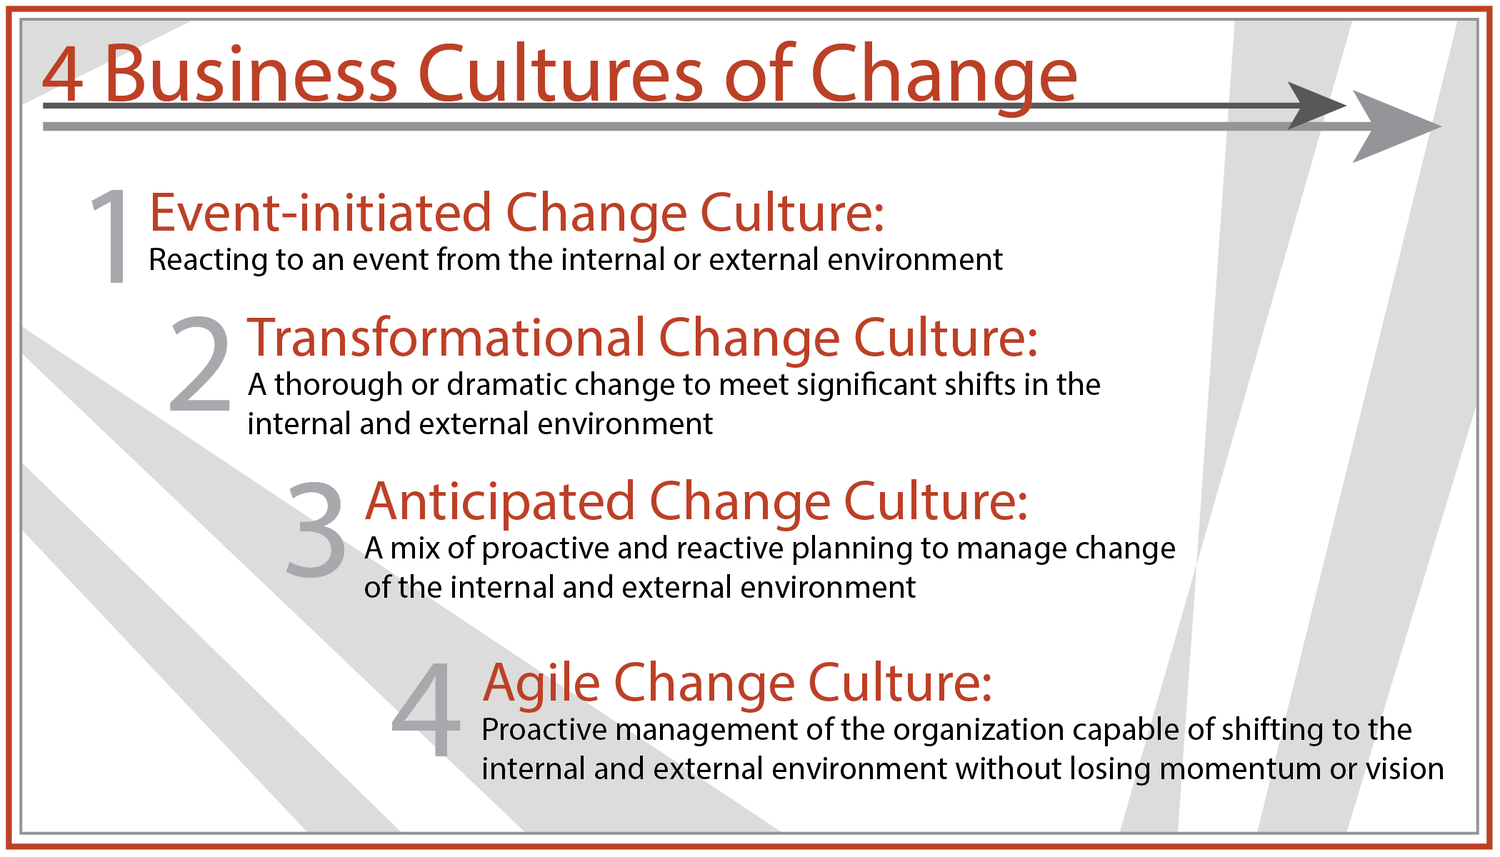 graphic with 4 types of business cultures of change